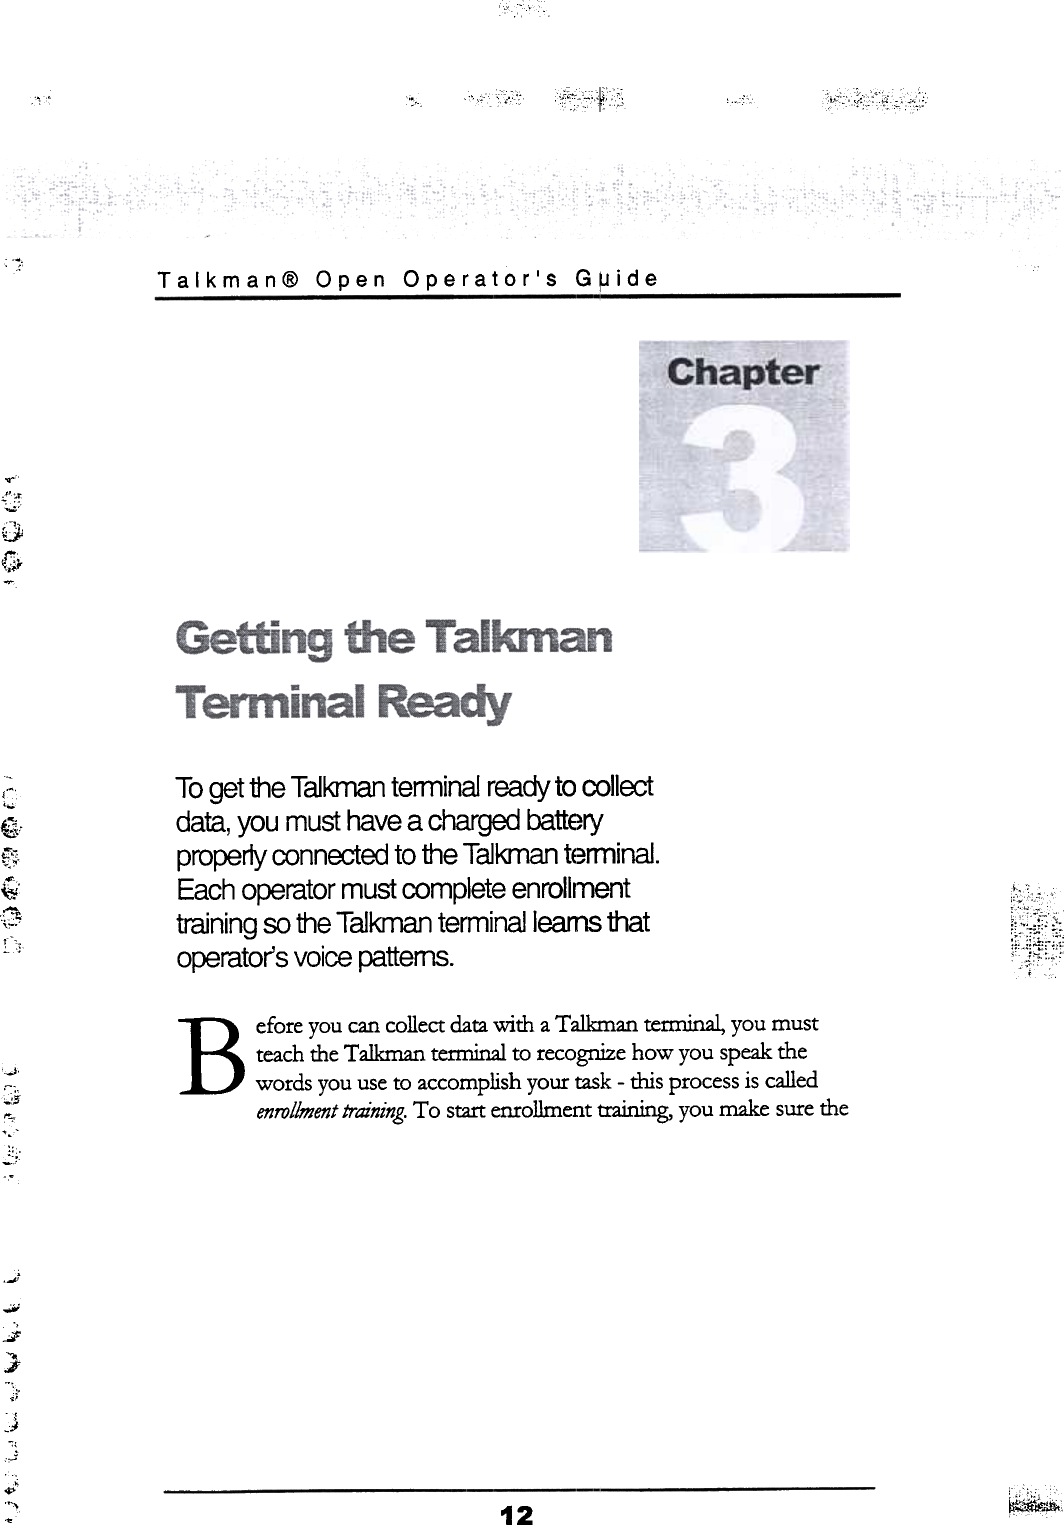 ~~~~~&quot;,~..c~~0~!~...t; ,,&apos;,&quot;&quot;~~,&quot;&apos;w~T o get the T aikman  terminal  ready  to collectdata, you  must  have  a charged  batteryproperly  connected  to the Talkman  terminal.Each  operator  must  complete  enrollmenttraining  so the T aikman  terminalleams  thatoperator&apos;s  voice  patterns. ~~*~Before you can collect data with  a Talkman  terminal, you mustteach the Talkman tenninal to recognize how you speak thewords you use to accomplish your task -this  process is calledenrollment training. To  start enrollment  training, you make sure the..t~&apos;il;0-&apos;&apos;,&apos;:i&apos;..ii.--,.J&quot;«..I&apos;~&apos;,.,;&quot;c).P&apos;-..&quot;.&apos; ~;12~,.,  Talkman@  Open  Operator&apos;s  G~ide